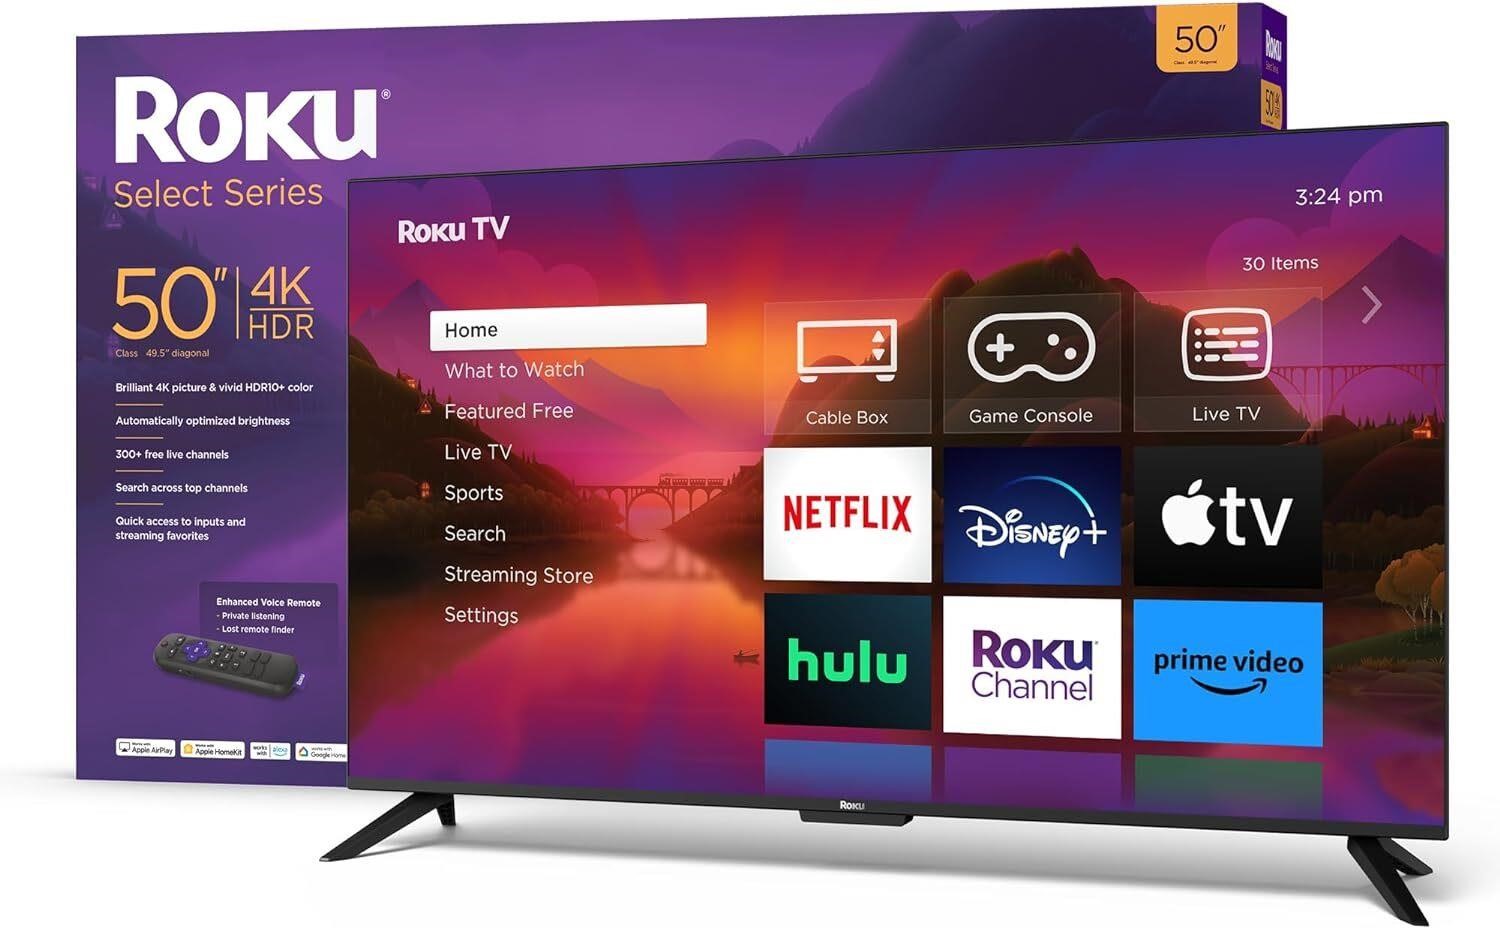 Roku 50 4K HDR Smart TV with Voice Remote